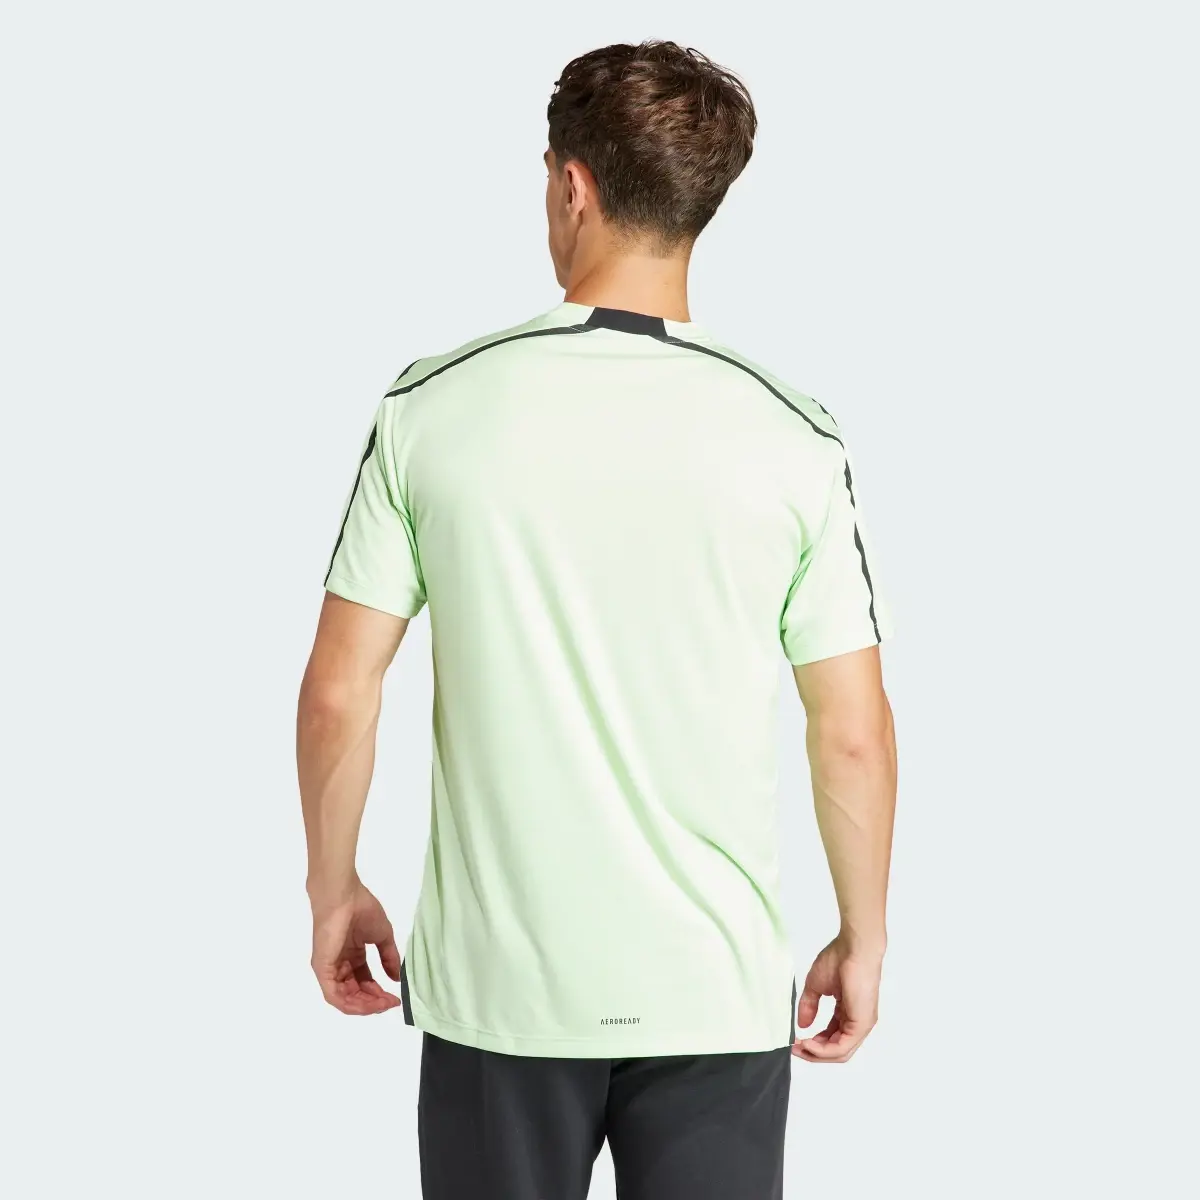 Adidas Designed for Training Adistrong Workout T-Shirt. 3